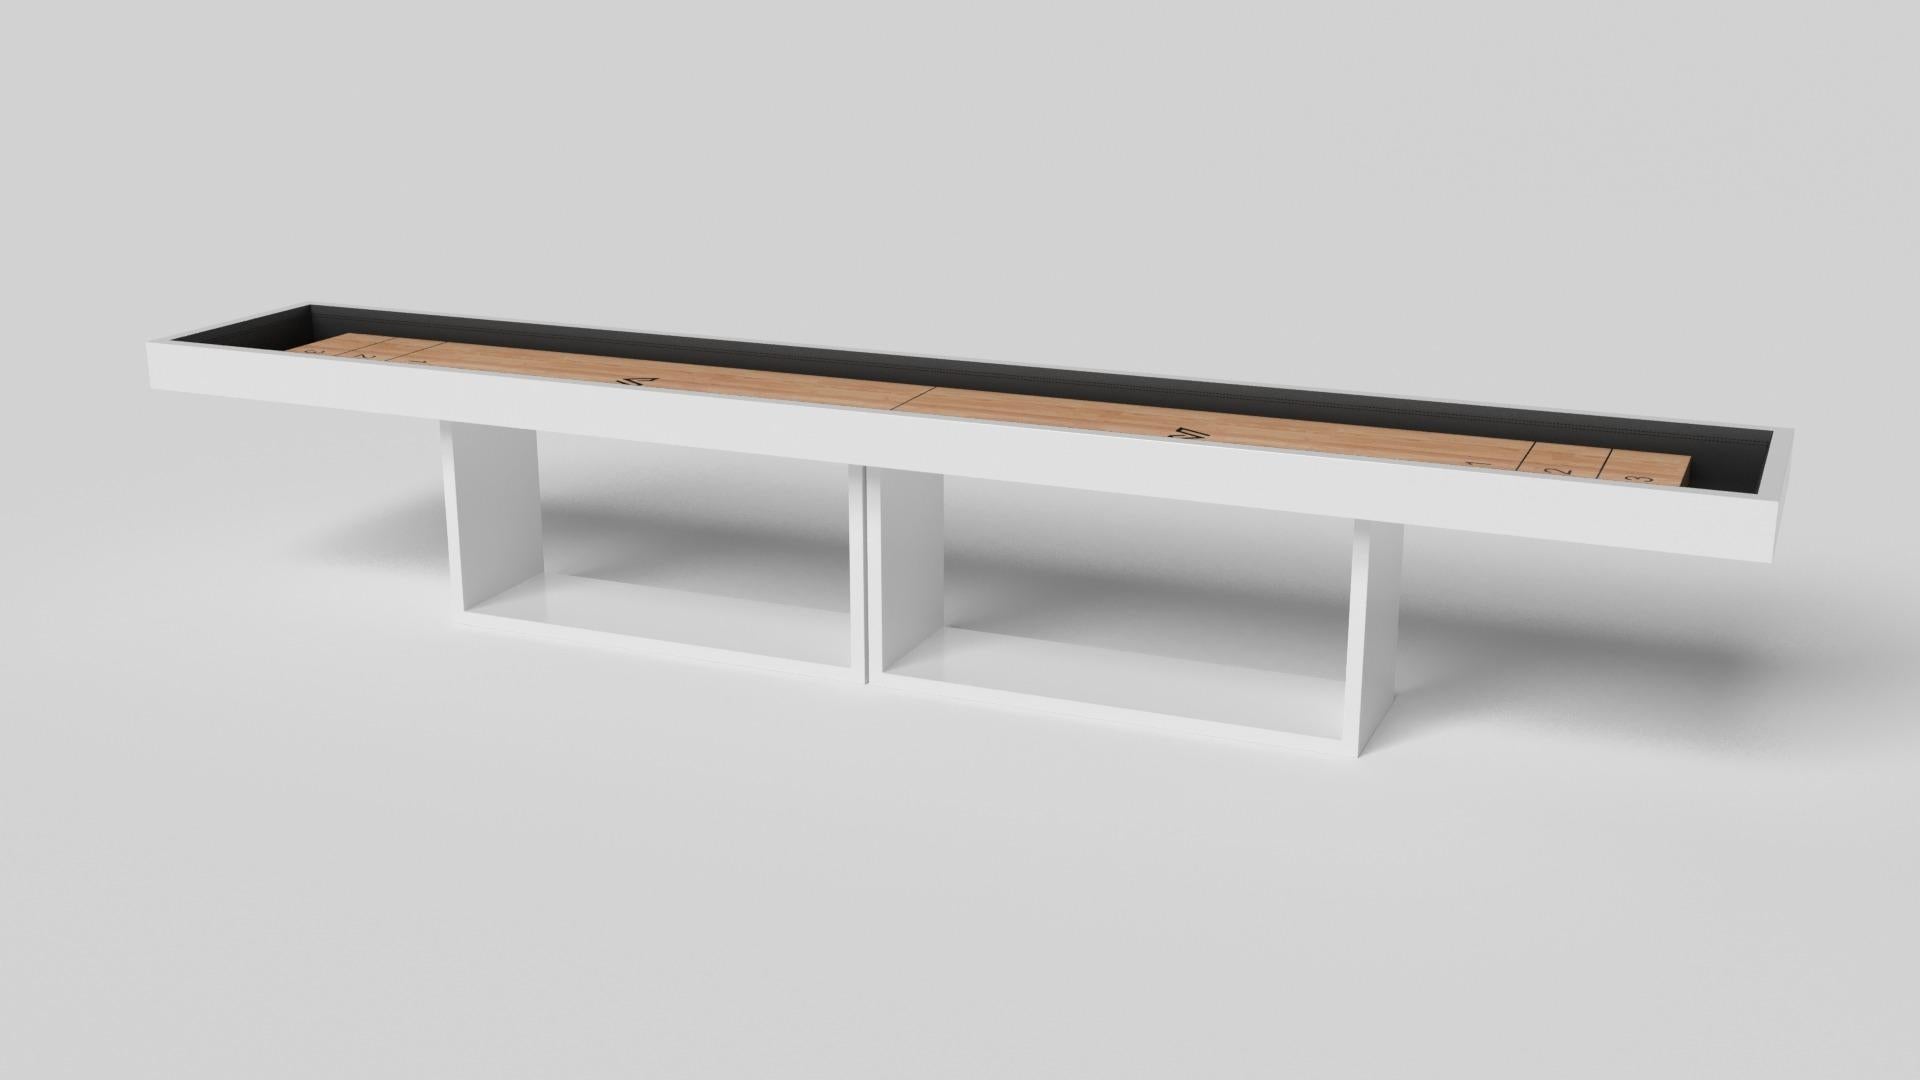 Supported by two rectangular open pedestals as the base, this handcrafted shuffleboard table is modern and minimalistic with its combination of simple, geometric forms. Viewed from the front, the use of negative space is evident; viewed from the